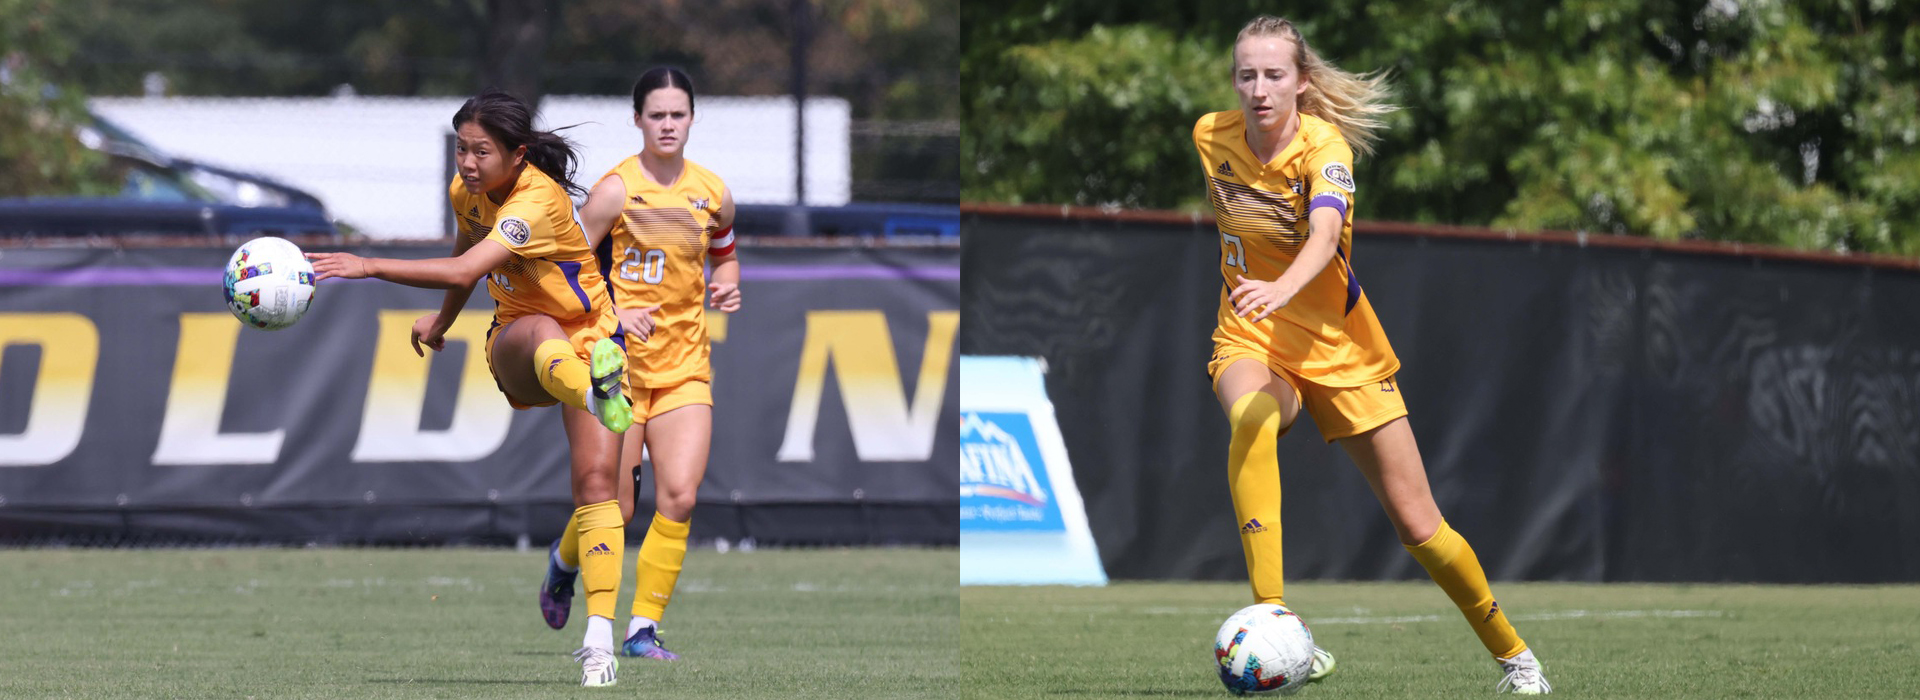 Giada Zhou recognized as OVC Offensive Player of the Week, Askildsen named Co-Defensive Player of the Week